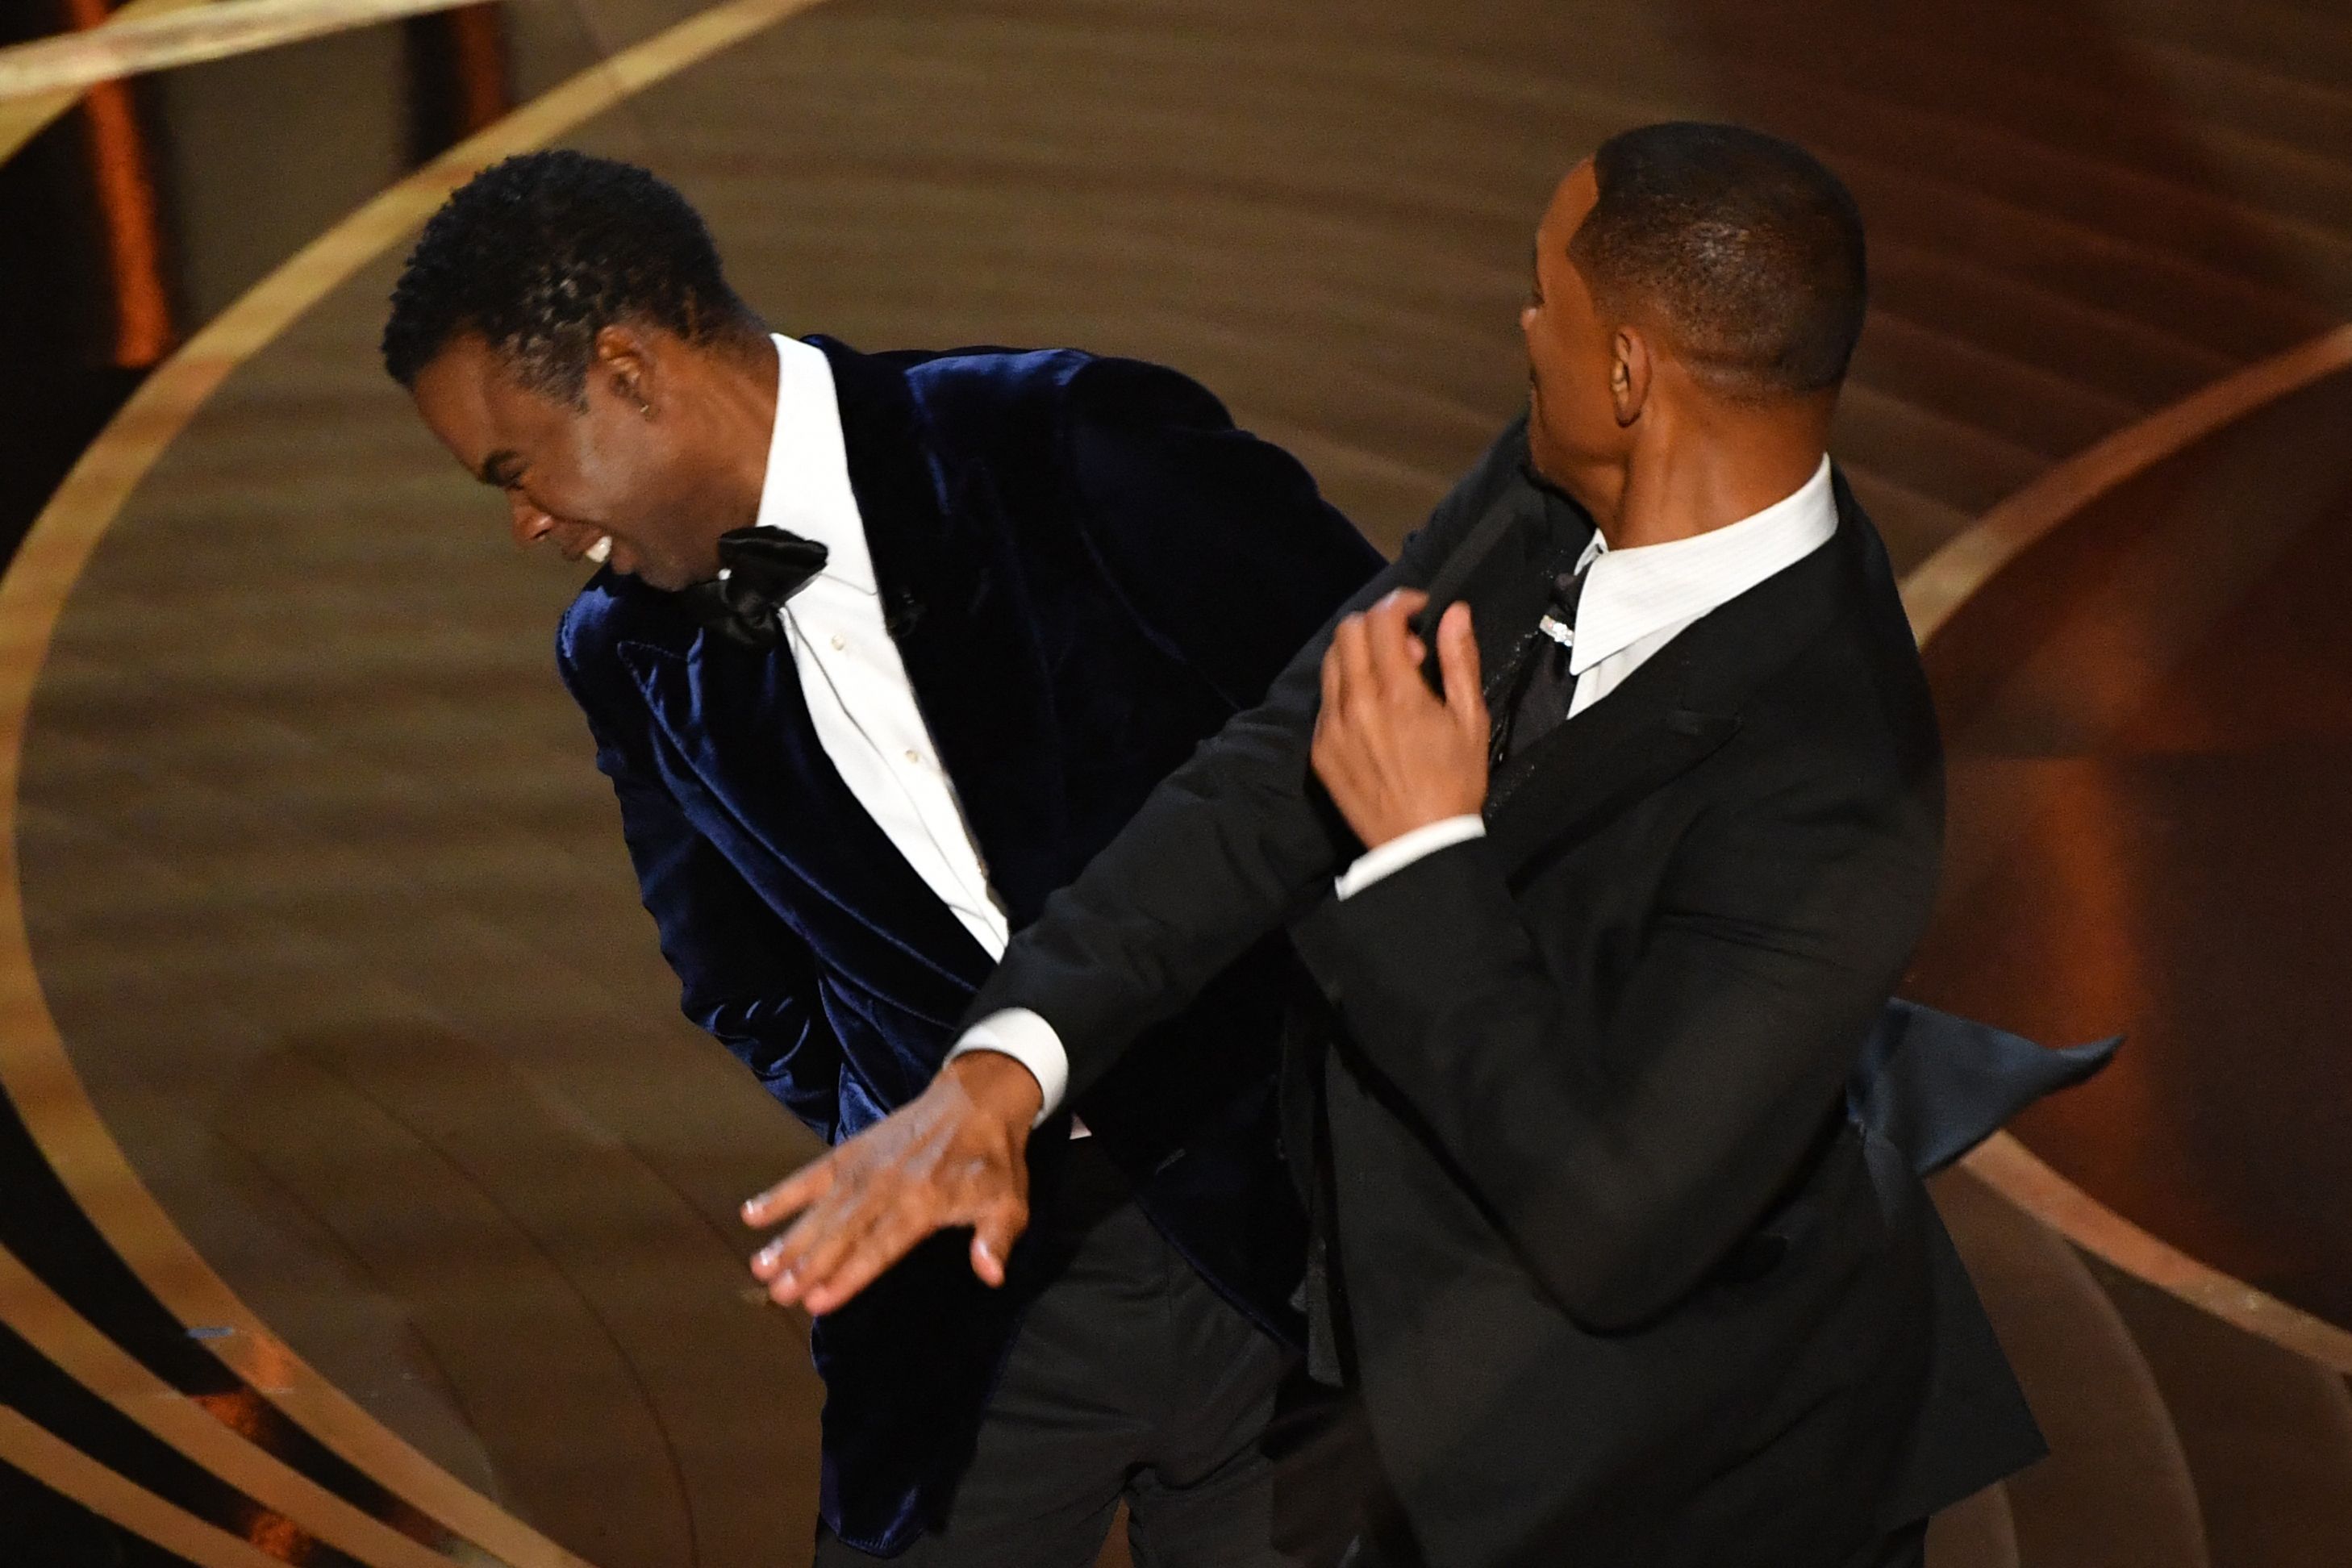 Will Smith slaps Chris Rock onstage during the 94th Oscars at the Dolby Theatre in Hollywood, California on March 27, 2022. | Source: Getty Images